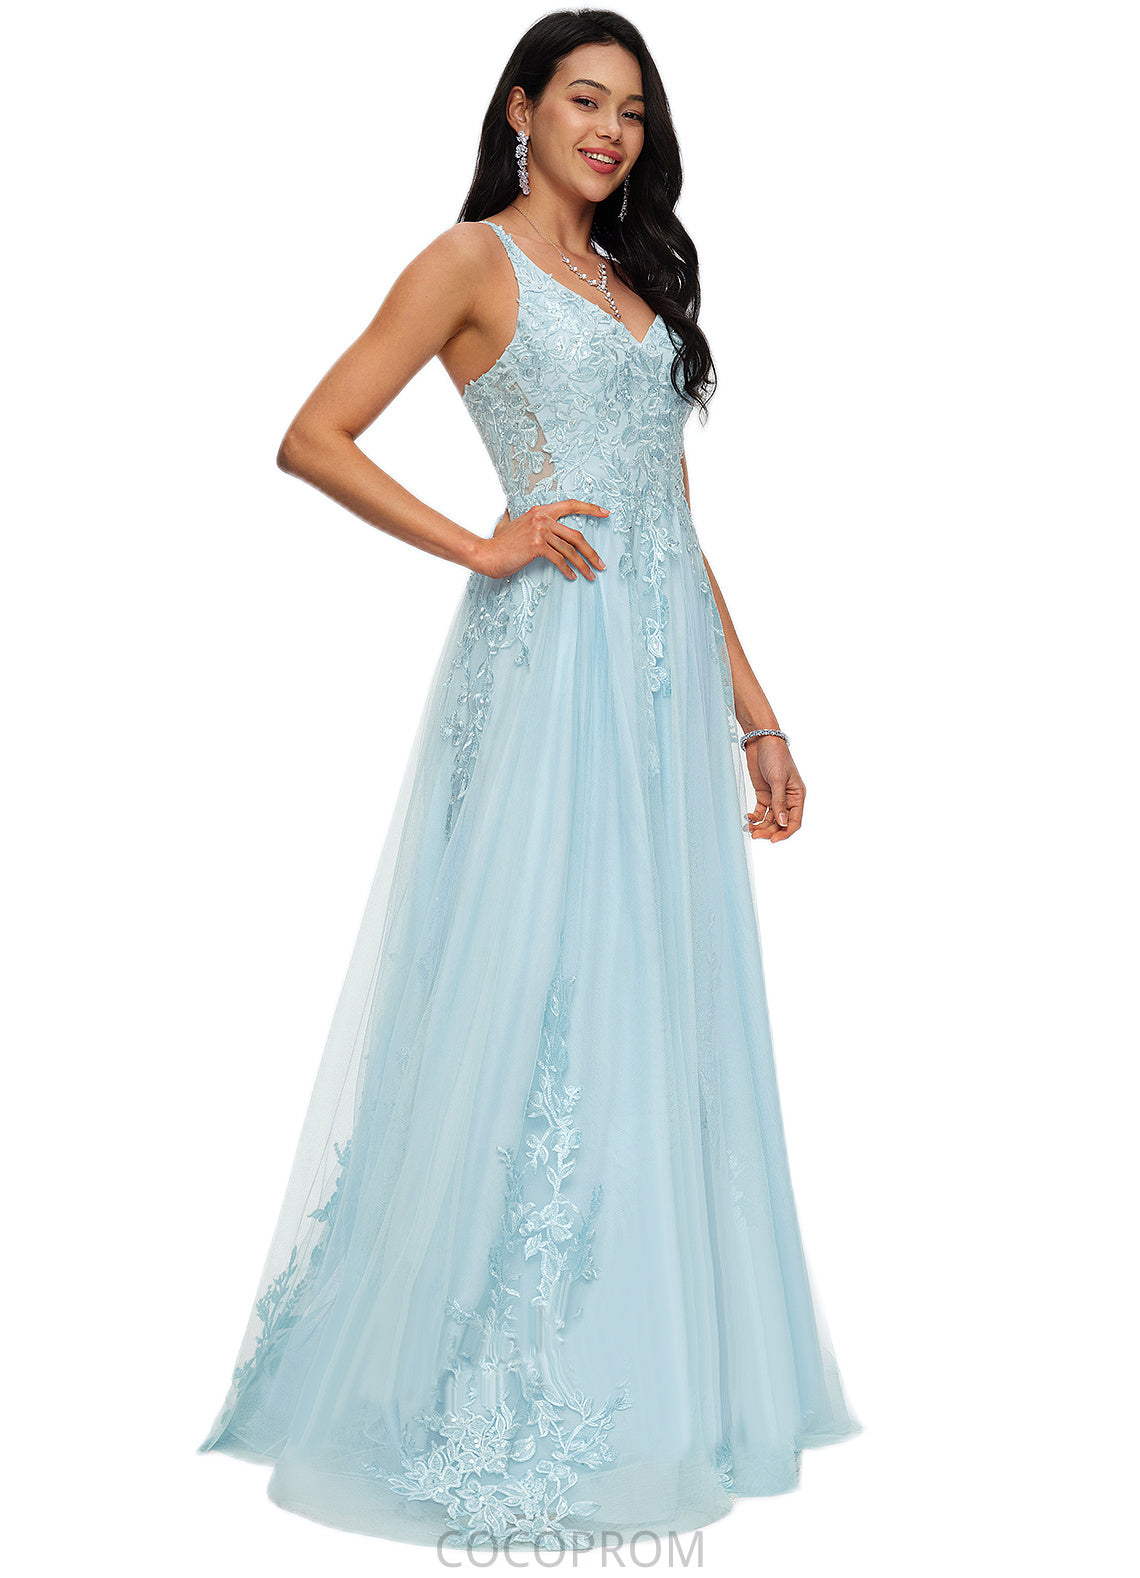 Florence A-line V-Neck Floor-Length Tulle Prom Dresses With Rhinestone Appliques Lace Sequins DBP0022225